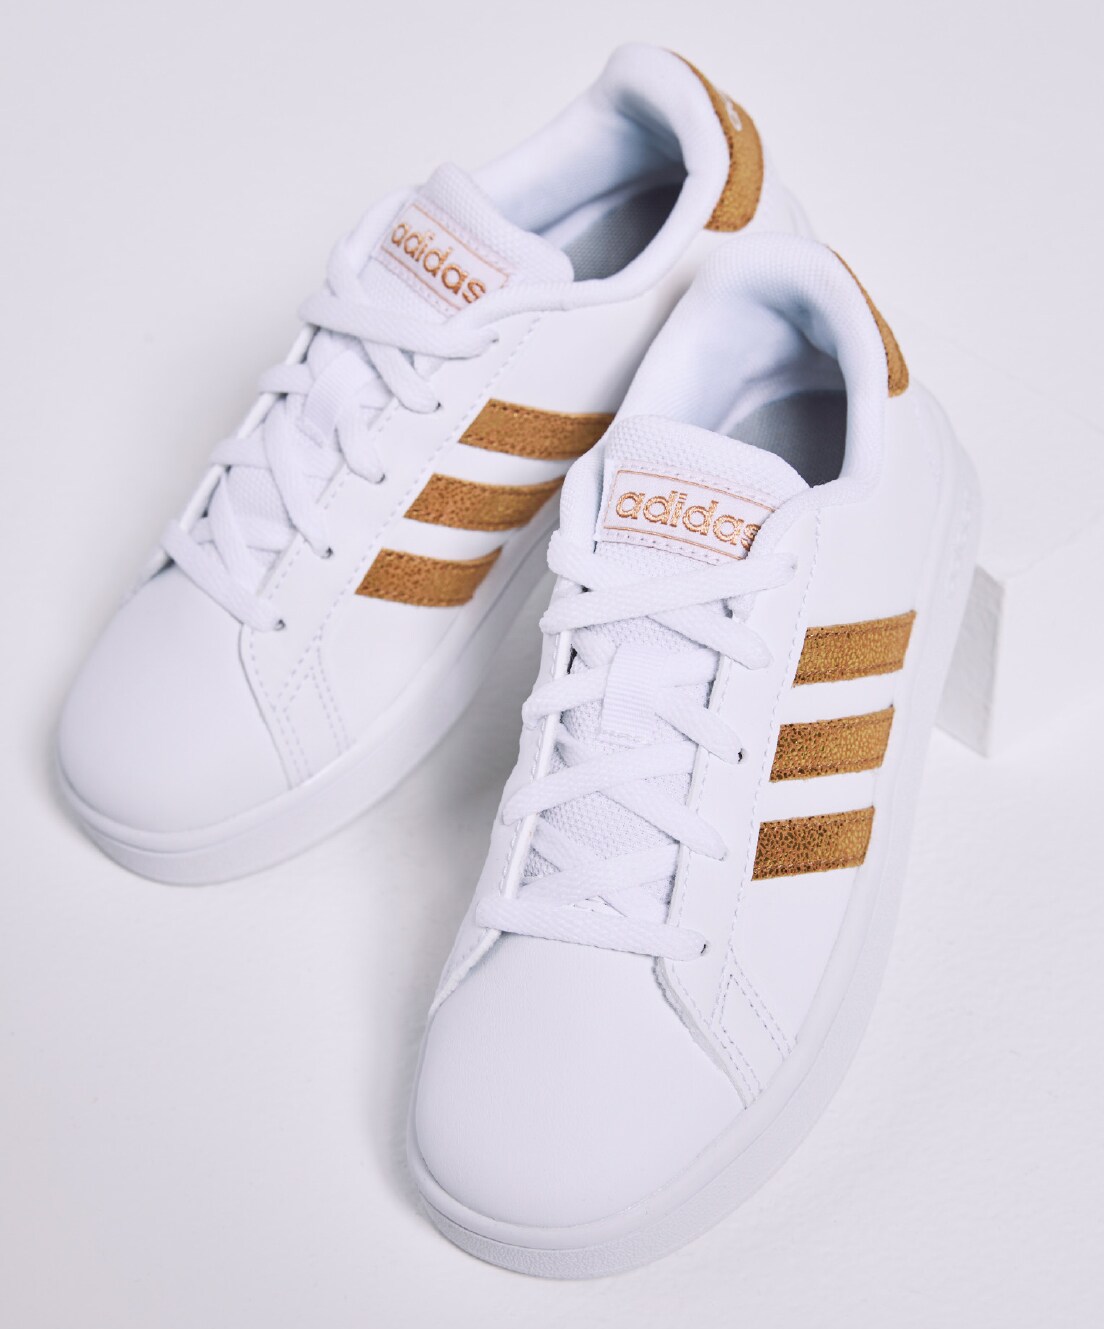 dsw shoes adidas